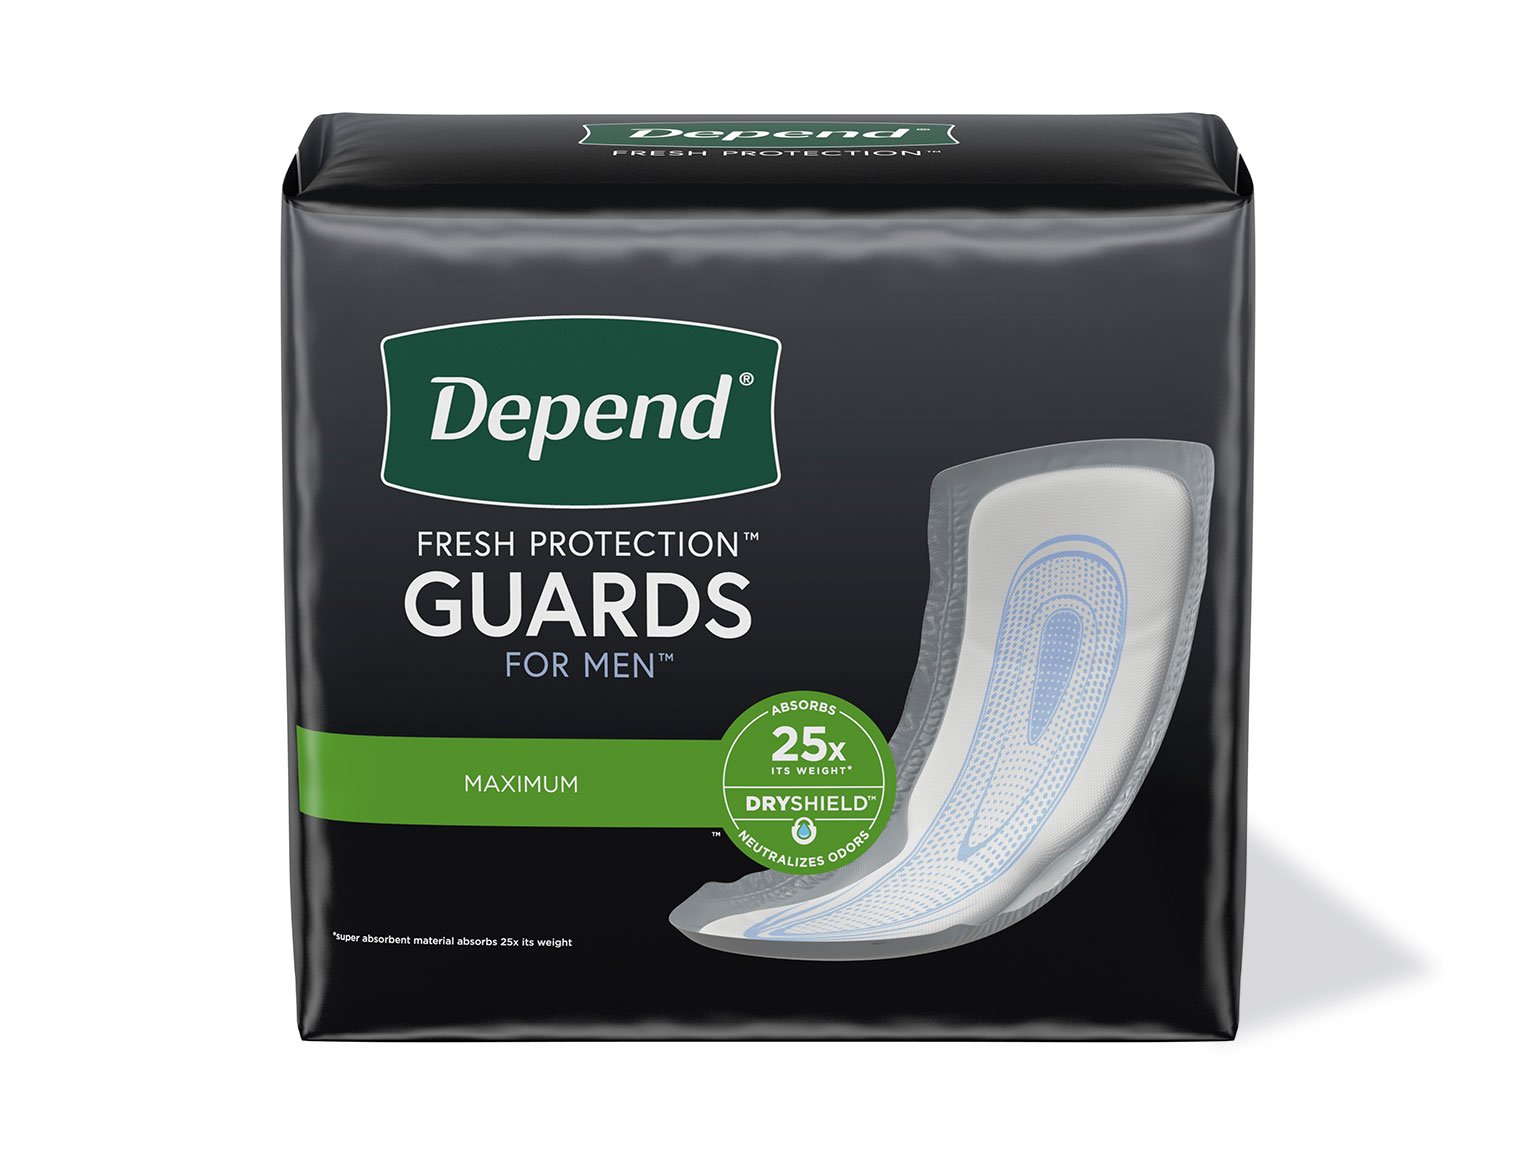 Depend® Incontinence Briefs Protection with Tabs, Maximum Absorbency – Save  Rite Medical